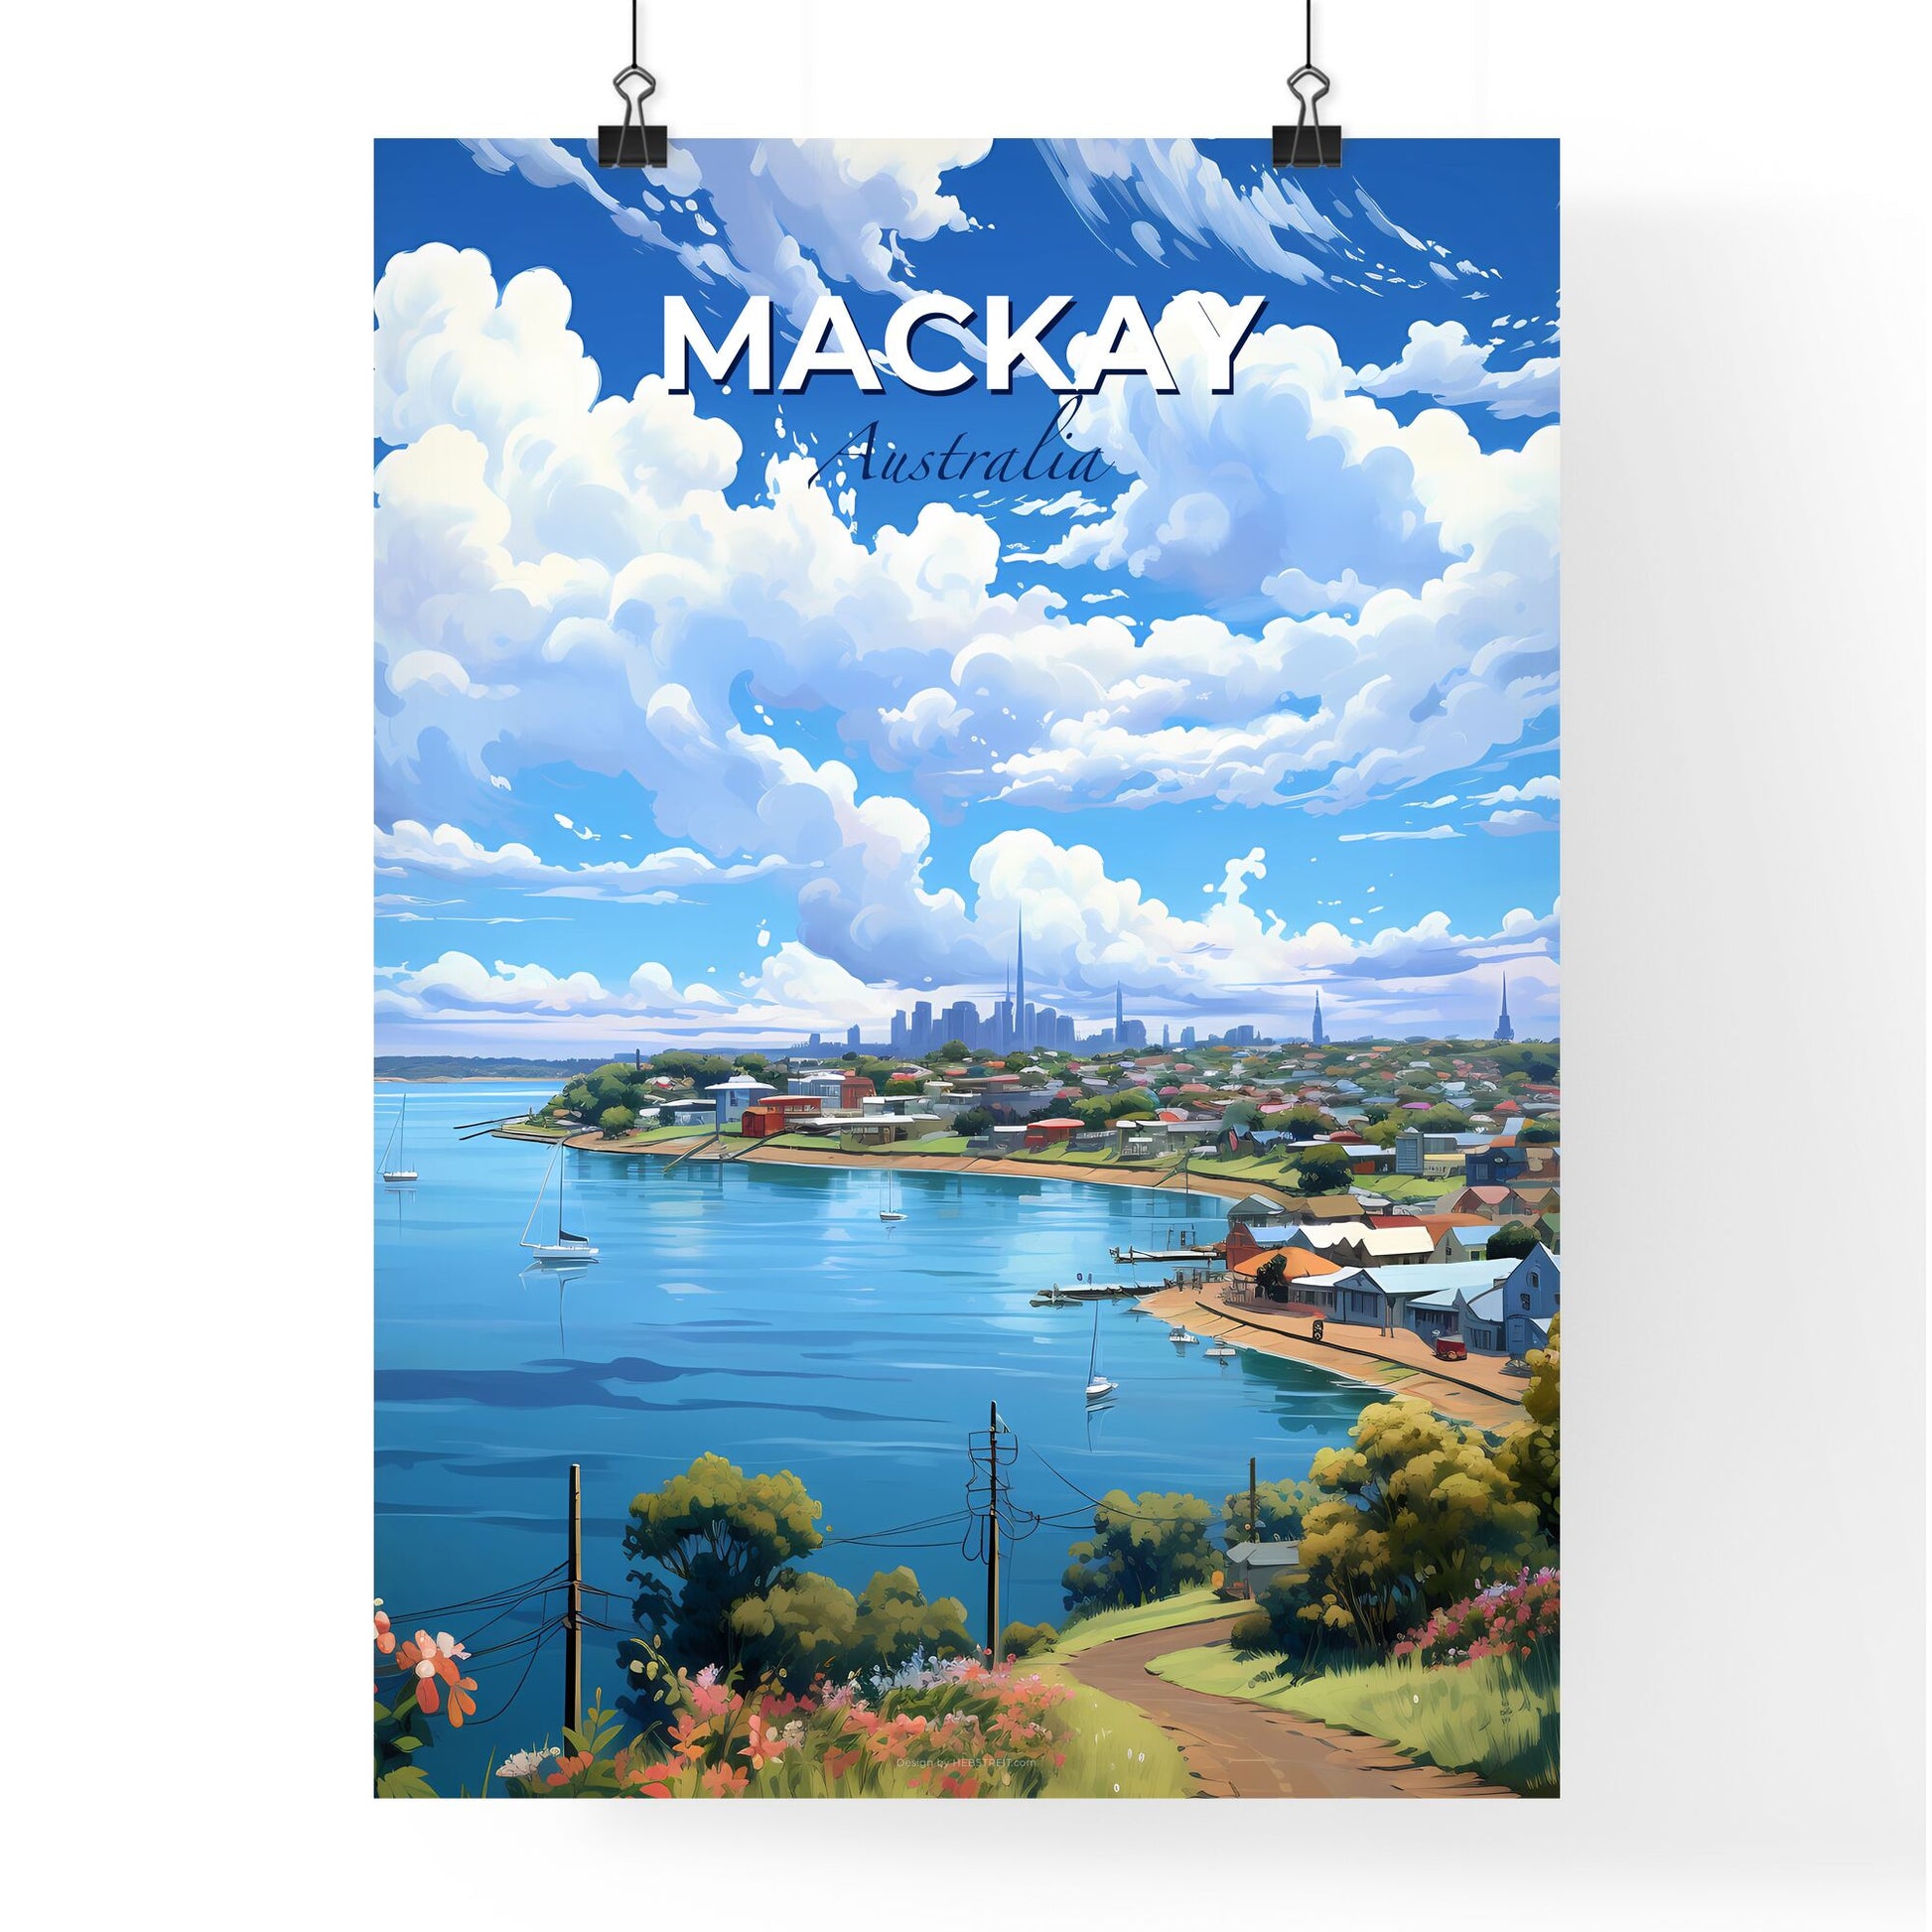 Mackay Australia Colorful City Skyline Canvas Painting Art by the Waterfront Default Title